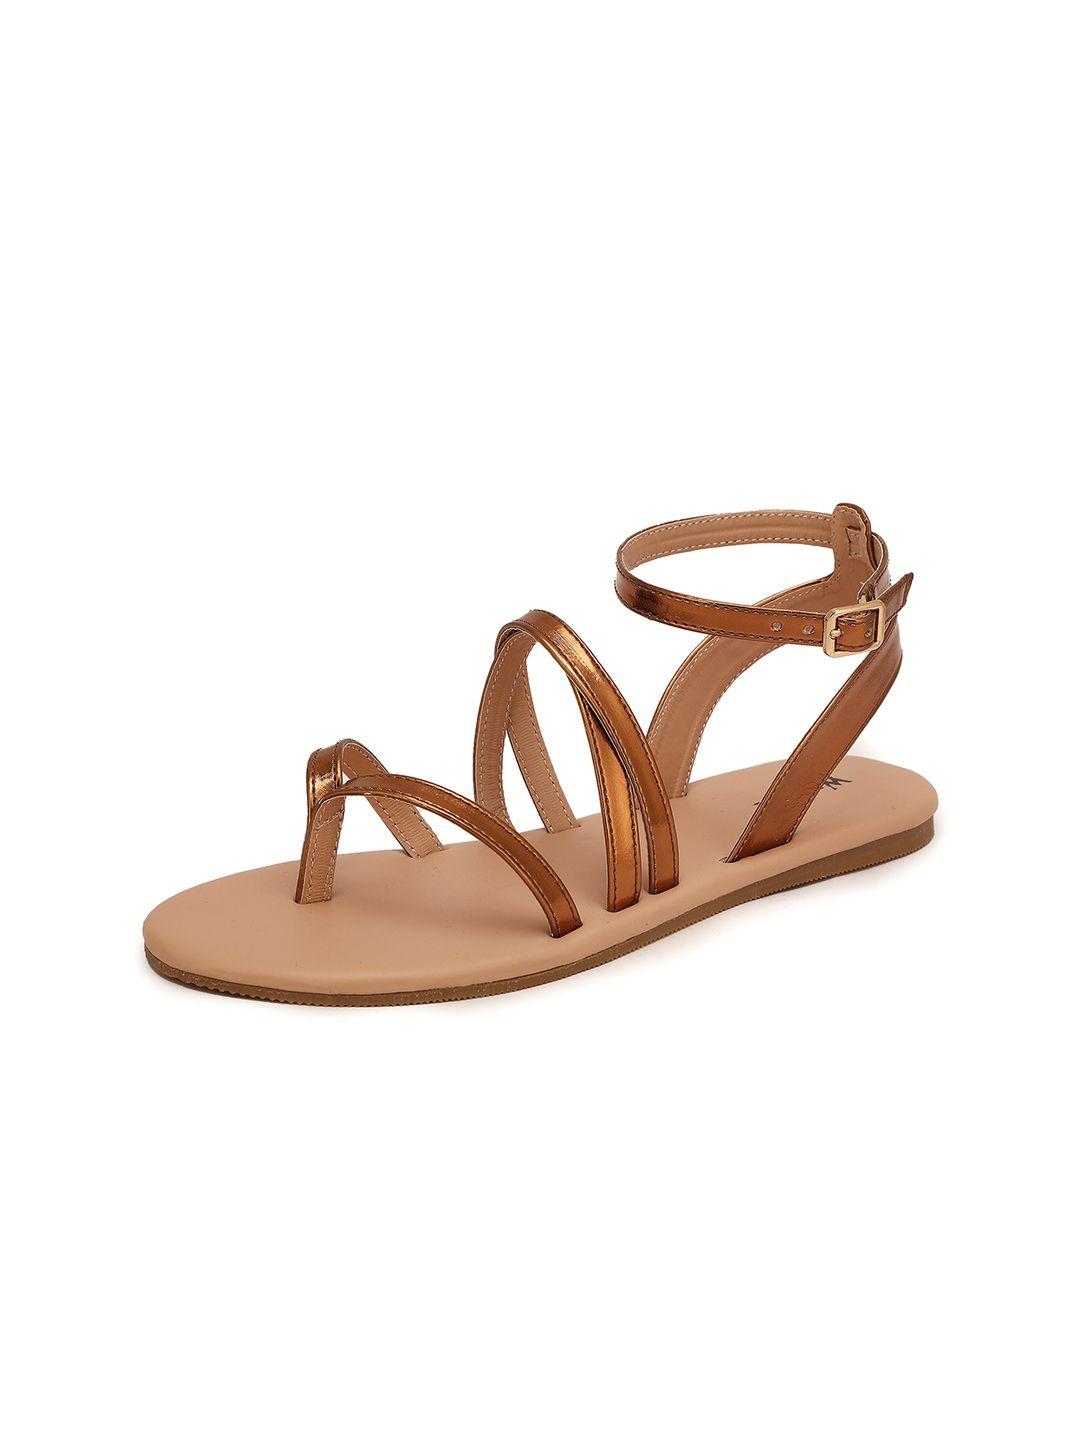 wzaya strappy open toe flats with buckle closure